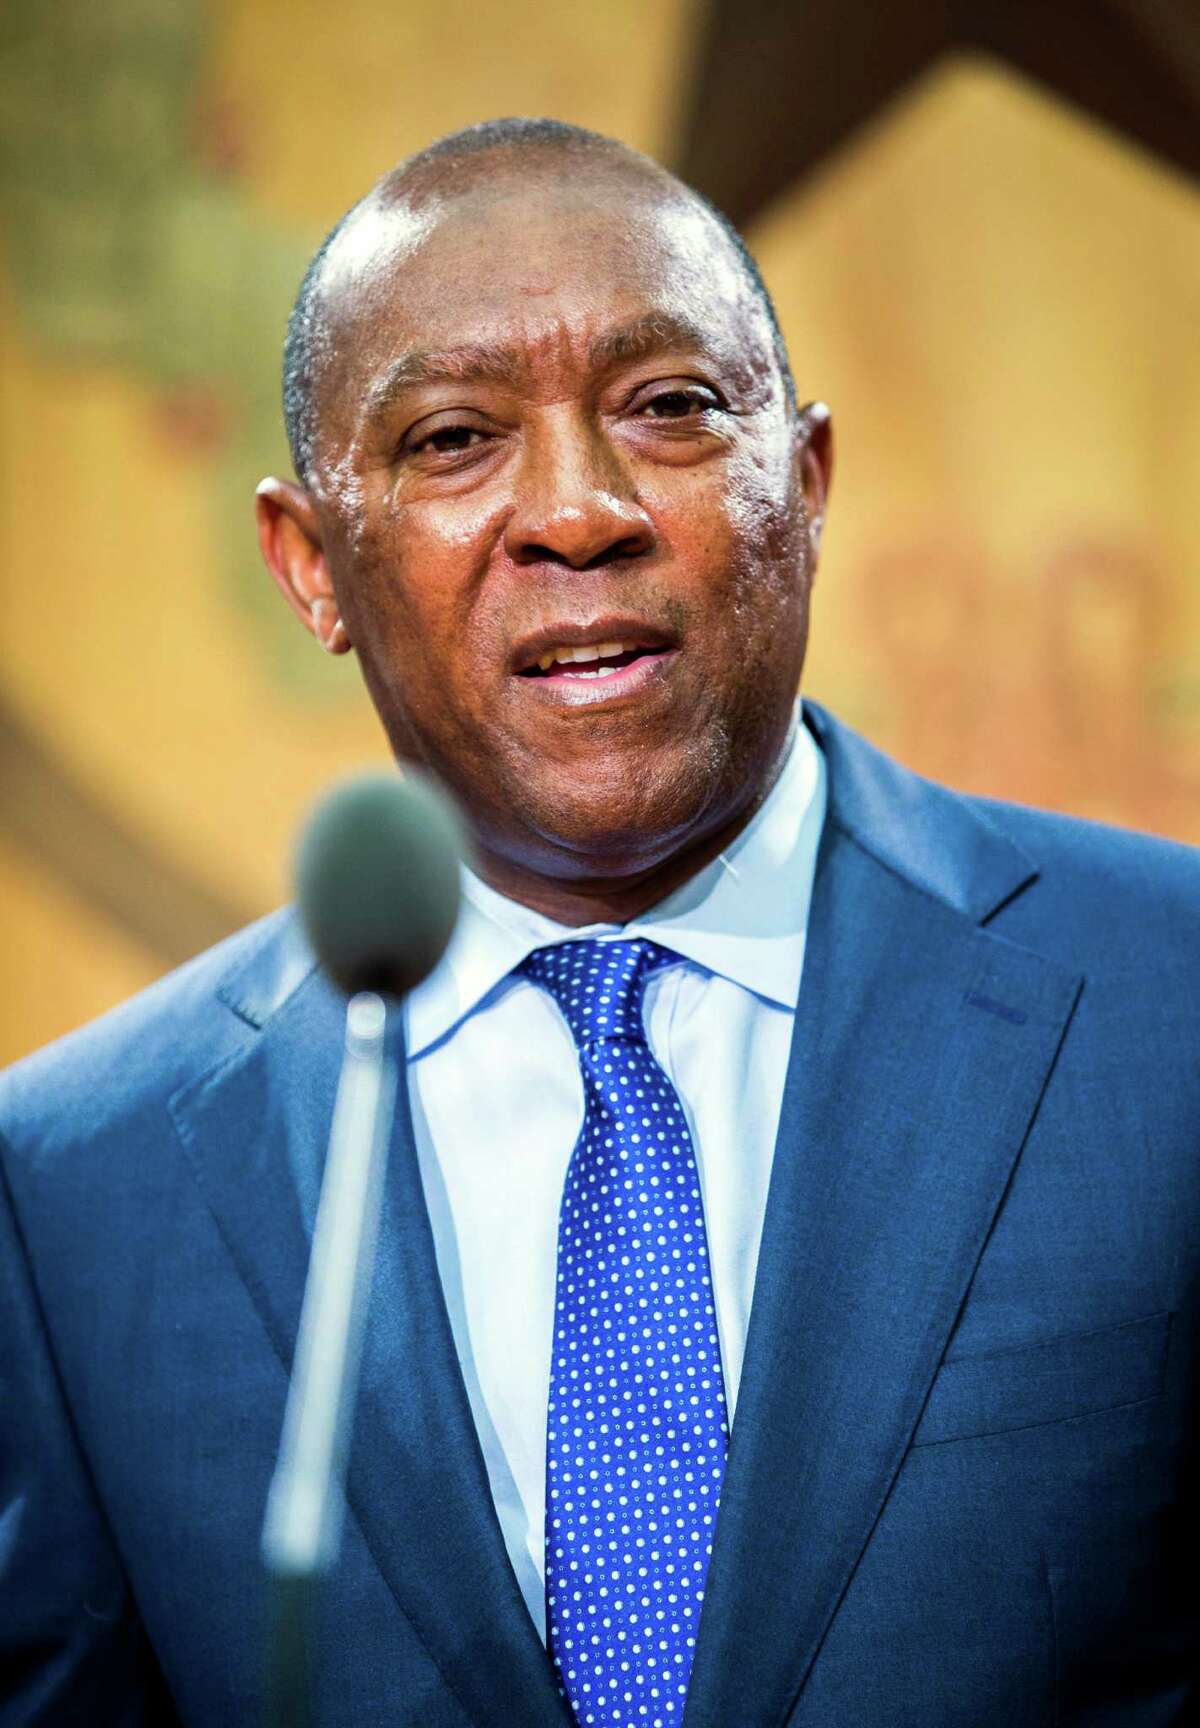 Lawmakers approved Houston Democratic state Rep. Sylvester Turner's bill to extend electricity discounts for low-income Texans, but he failed to win approval for a proposal to prohibit electric companies from penalizing consumers who don't use enough power in a month. (Ashley Landis/The Dallas Morning News via AP)